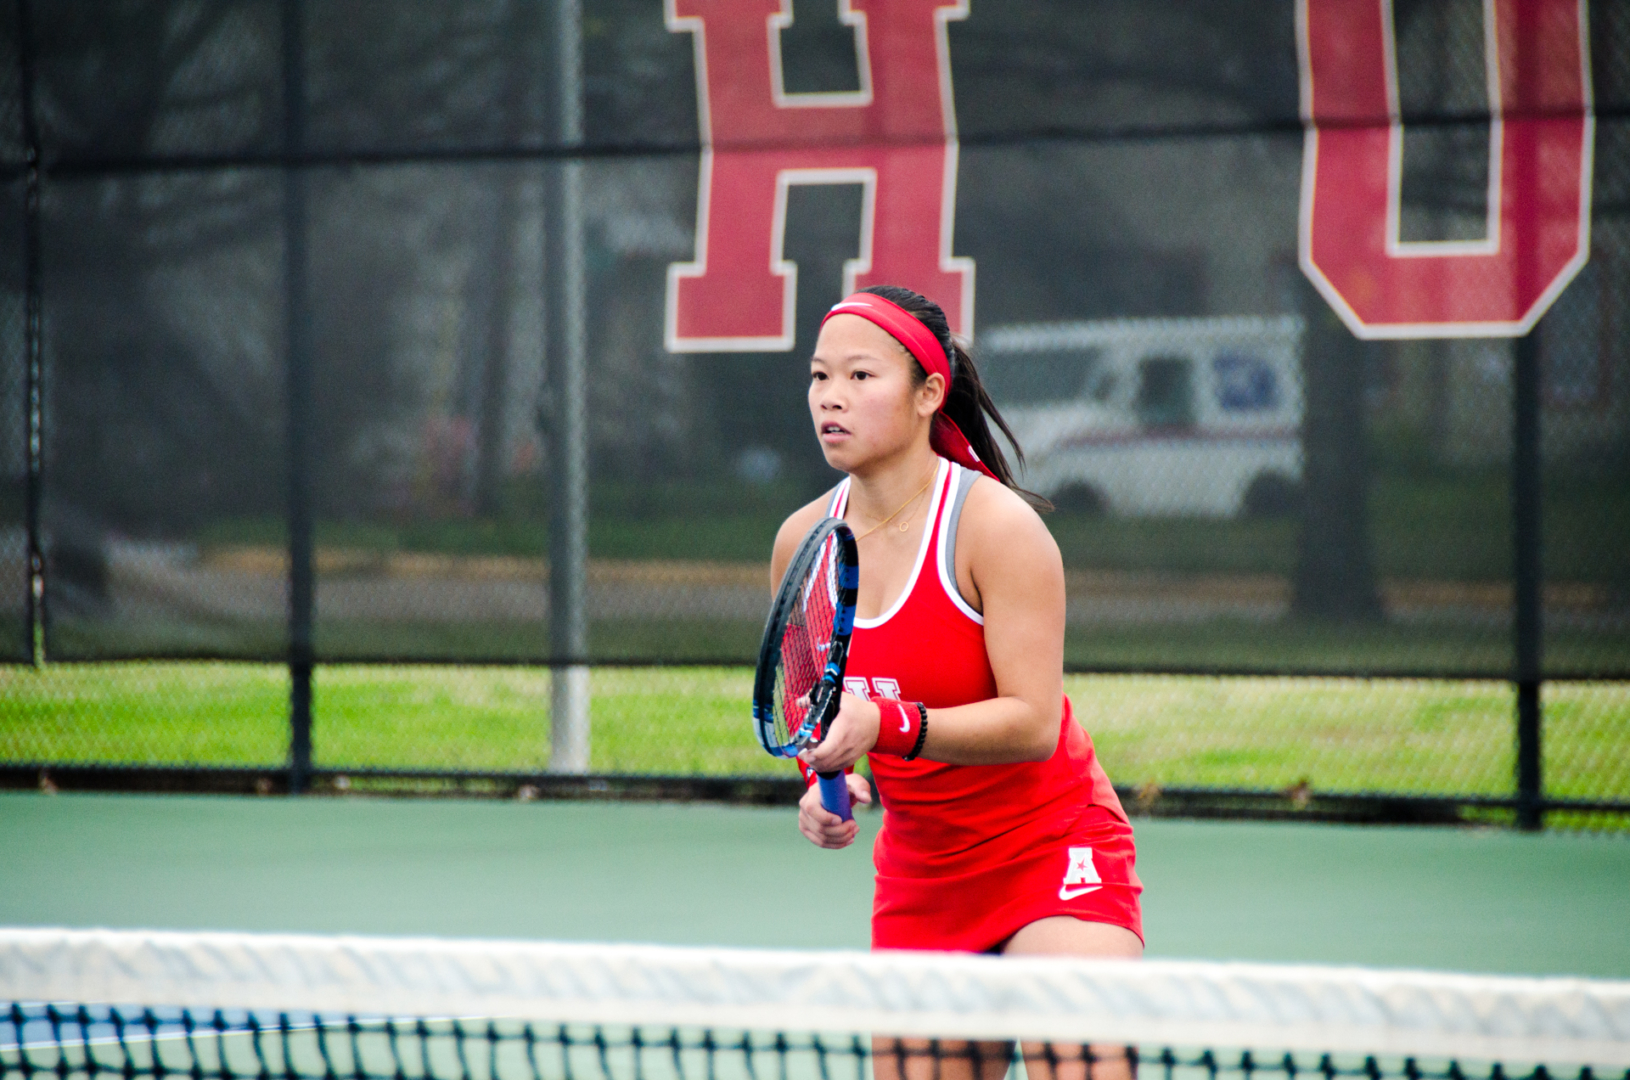 UH tennis fell 4-3 to Memphis on Friday. | Lino Sandil/The Cougar